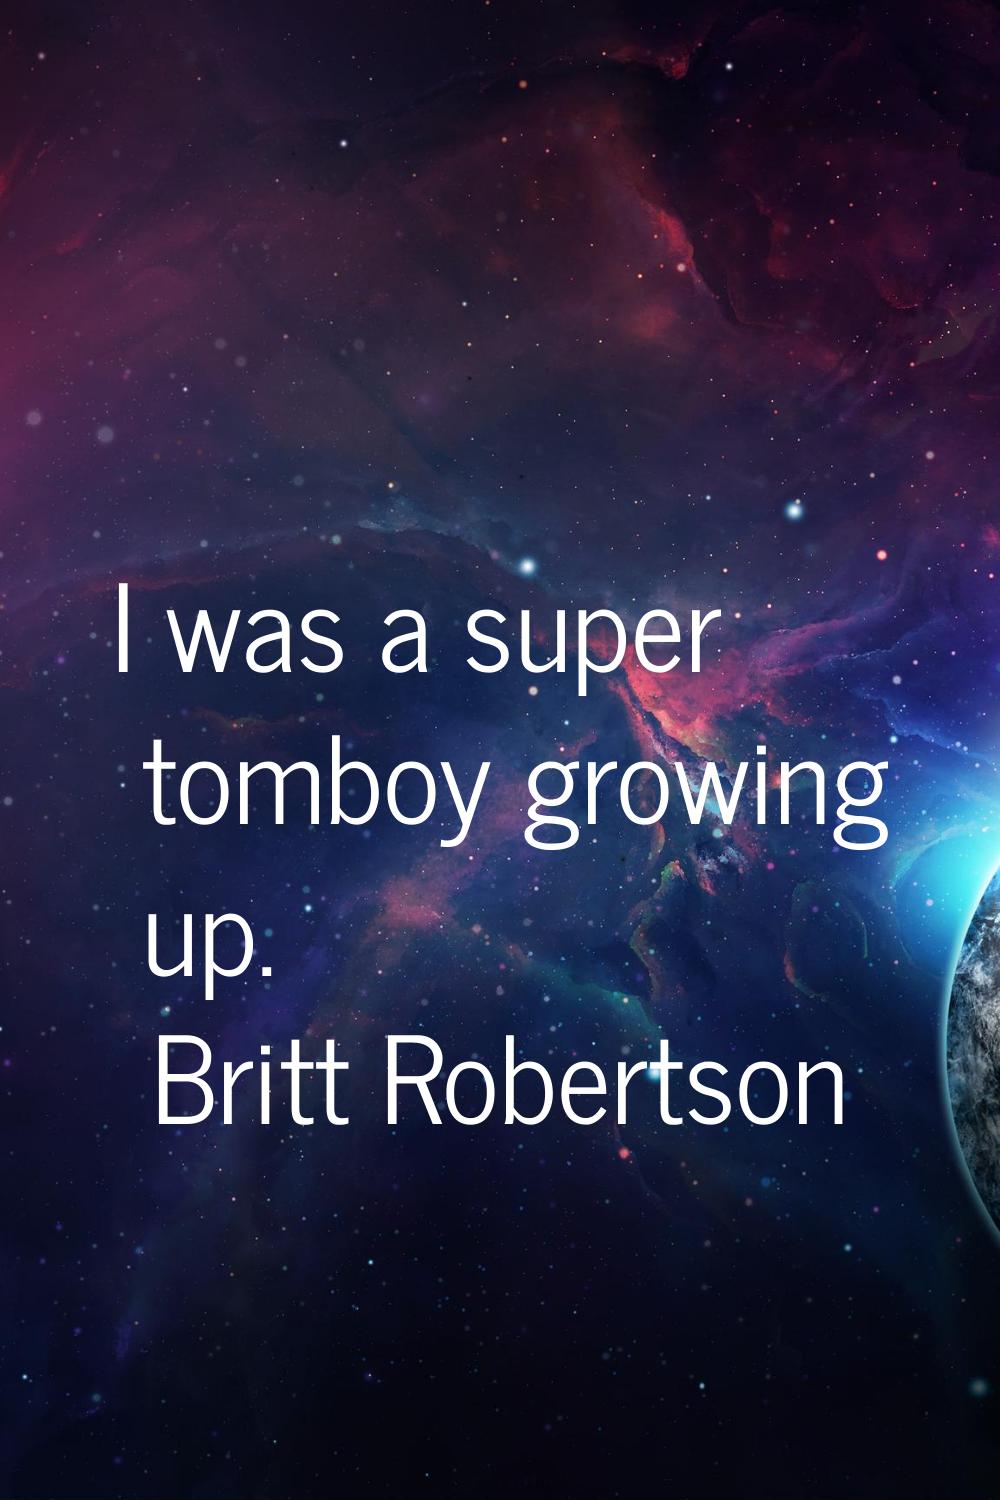 I was a super tomboy growing up.